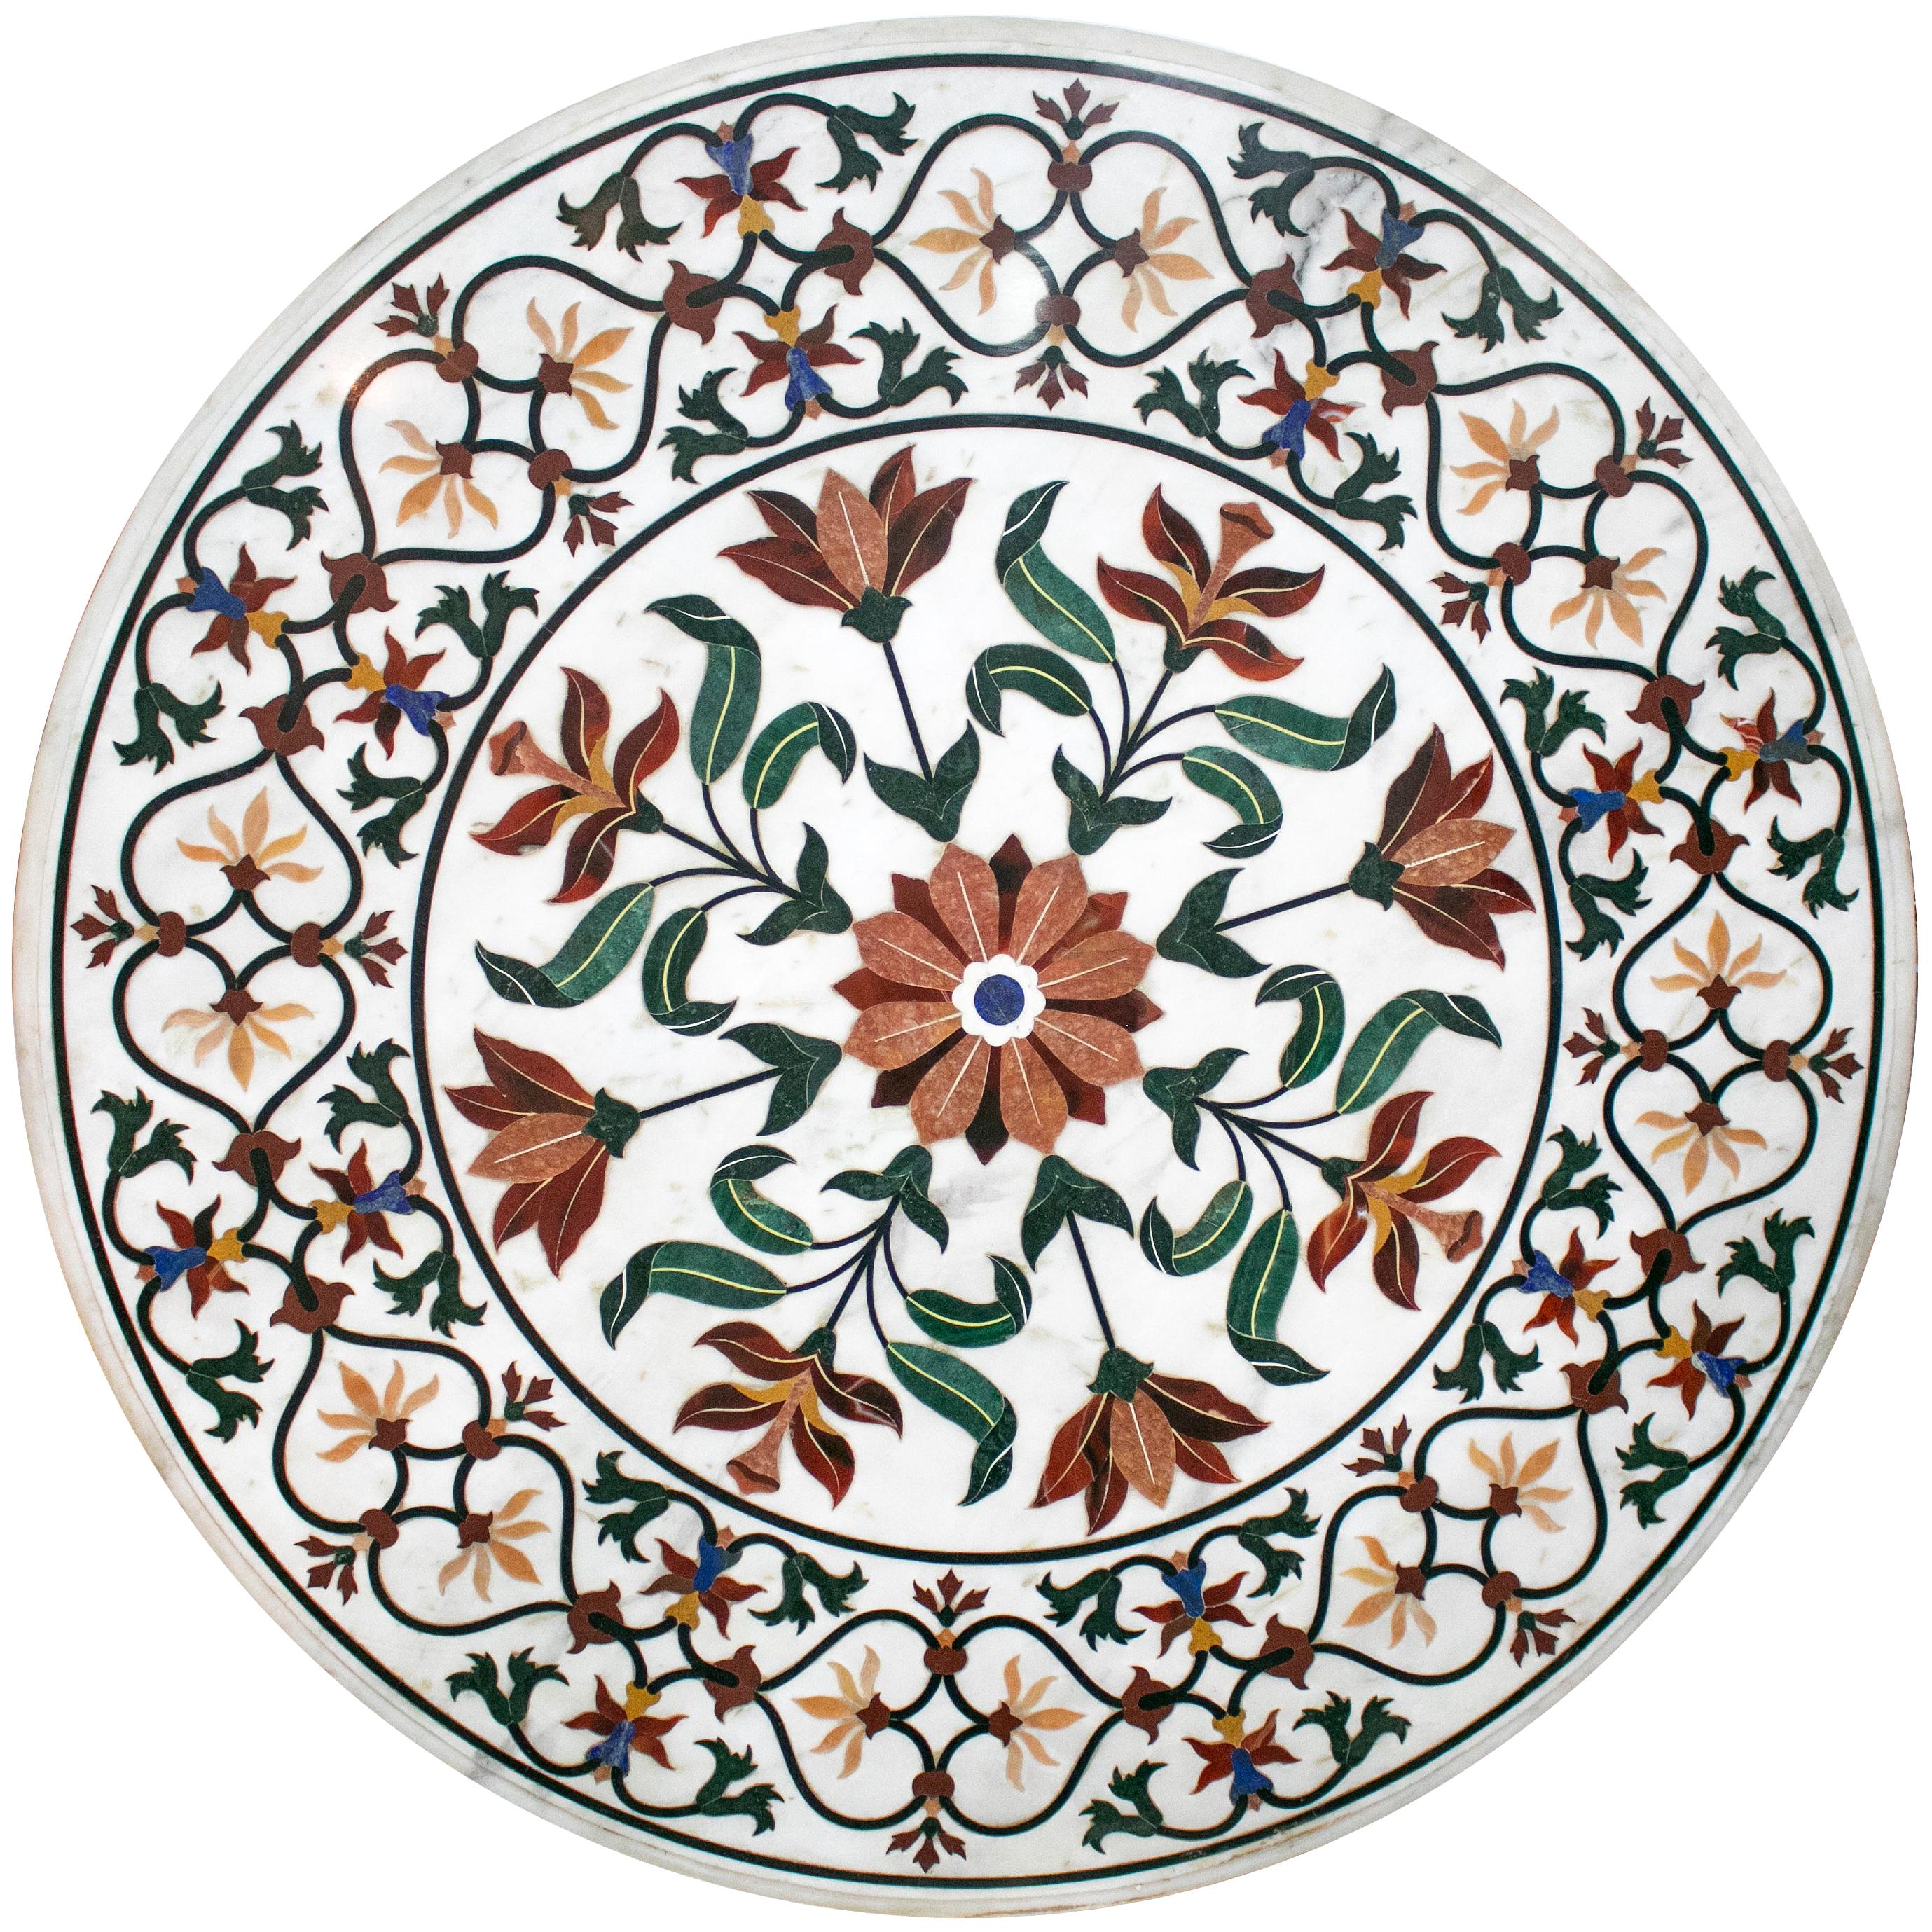 Details about   14" Marble round Table Top floral inlay semi precious stones work decor 